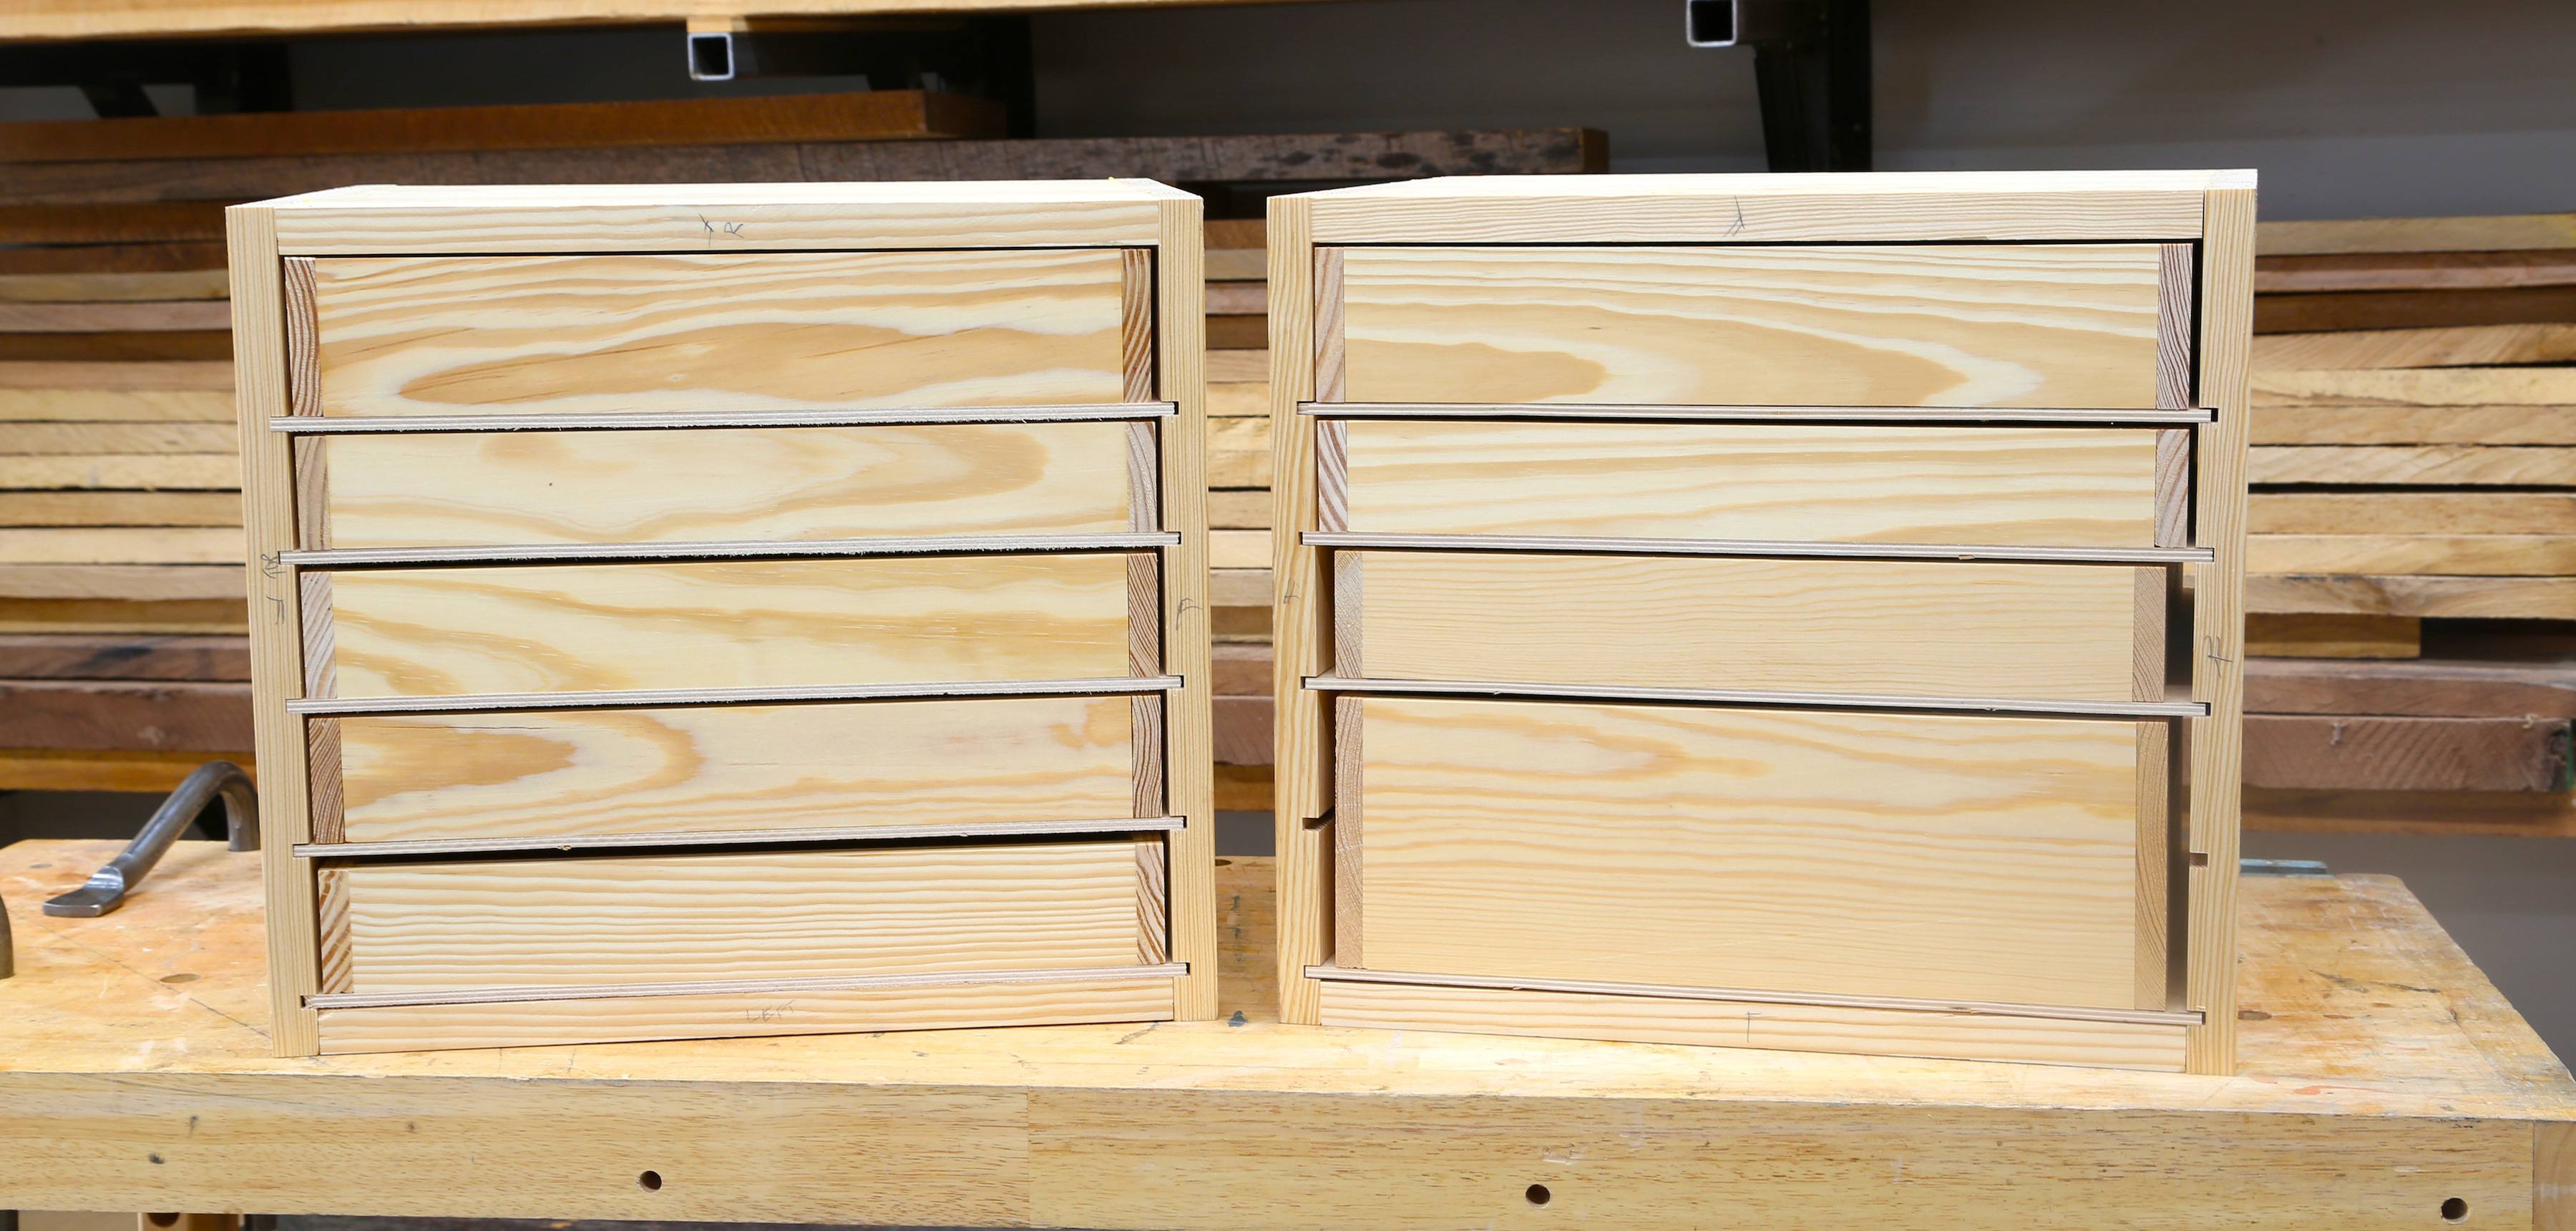 How to Build Drawers Free DIY Tool Drawer Plans